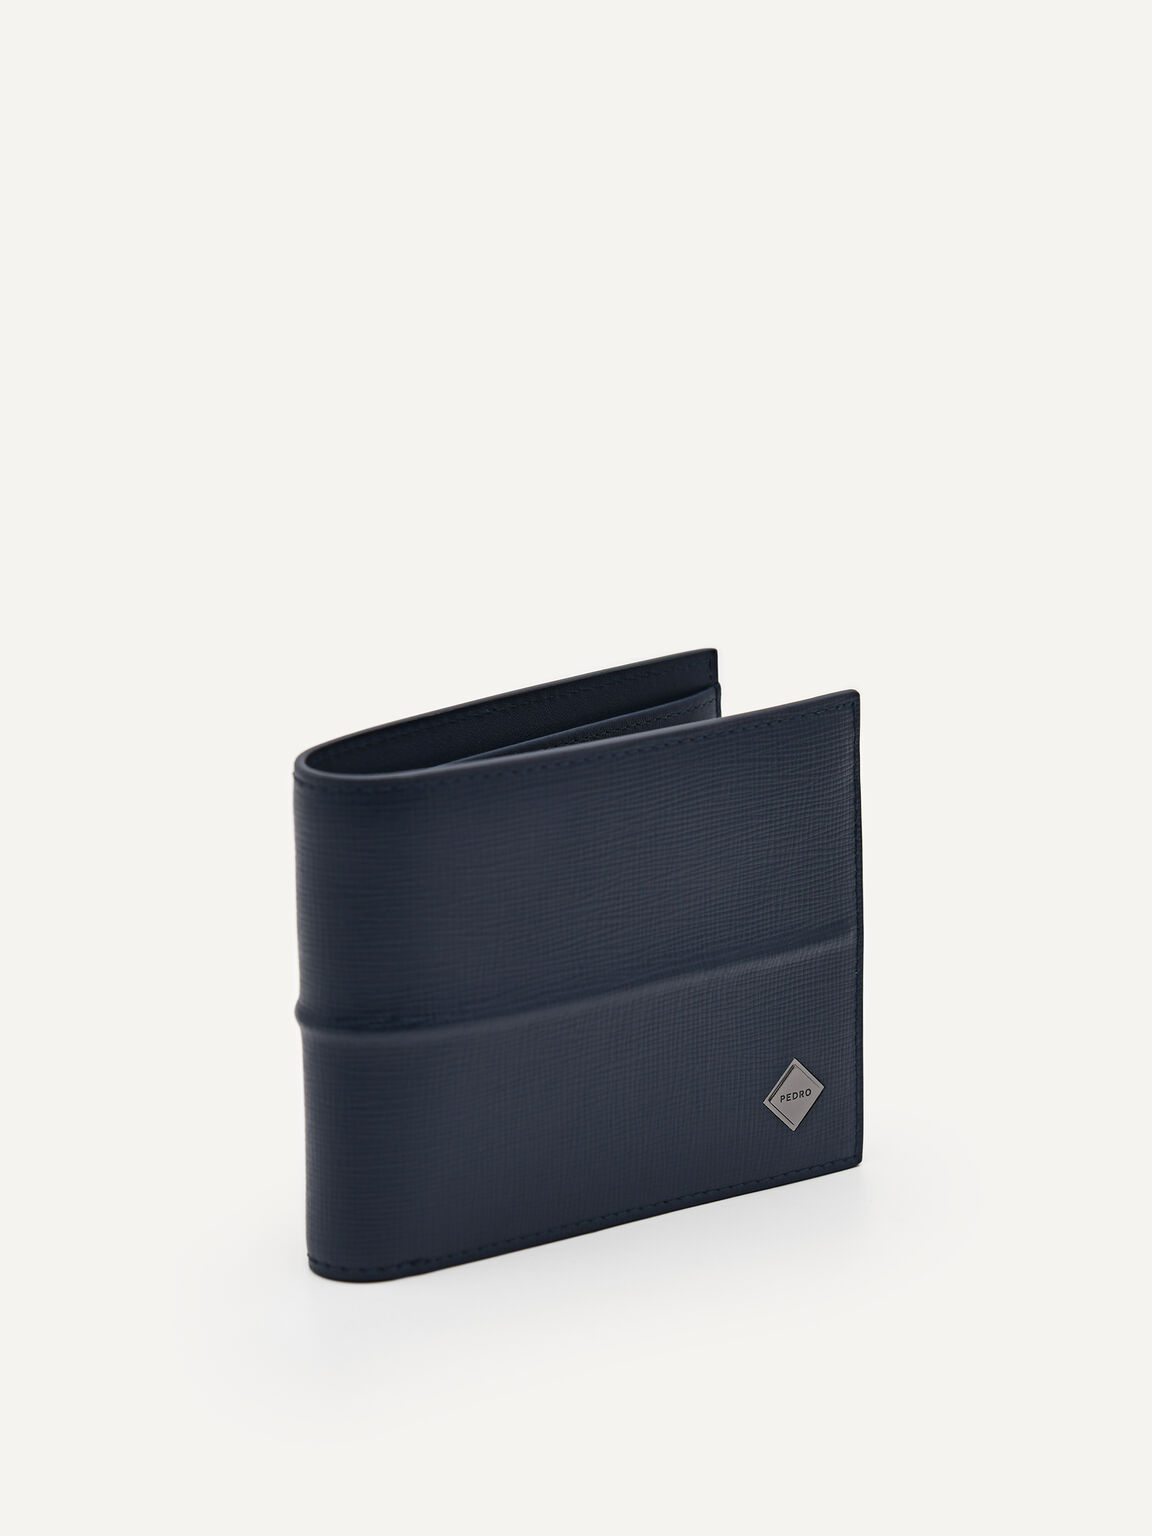 Embossed Leather Bi-Fold Wallet with Insert, Navy, hi-res